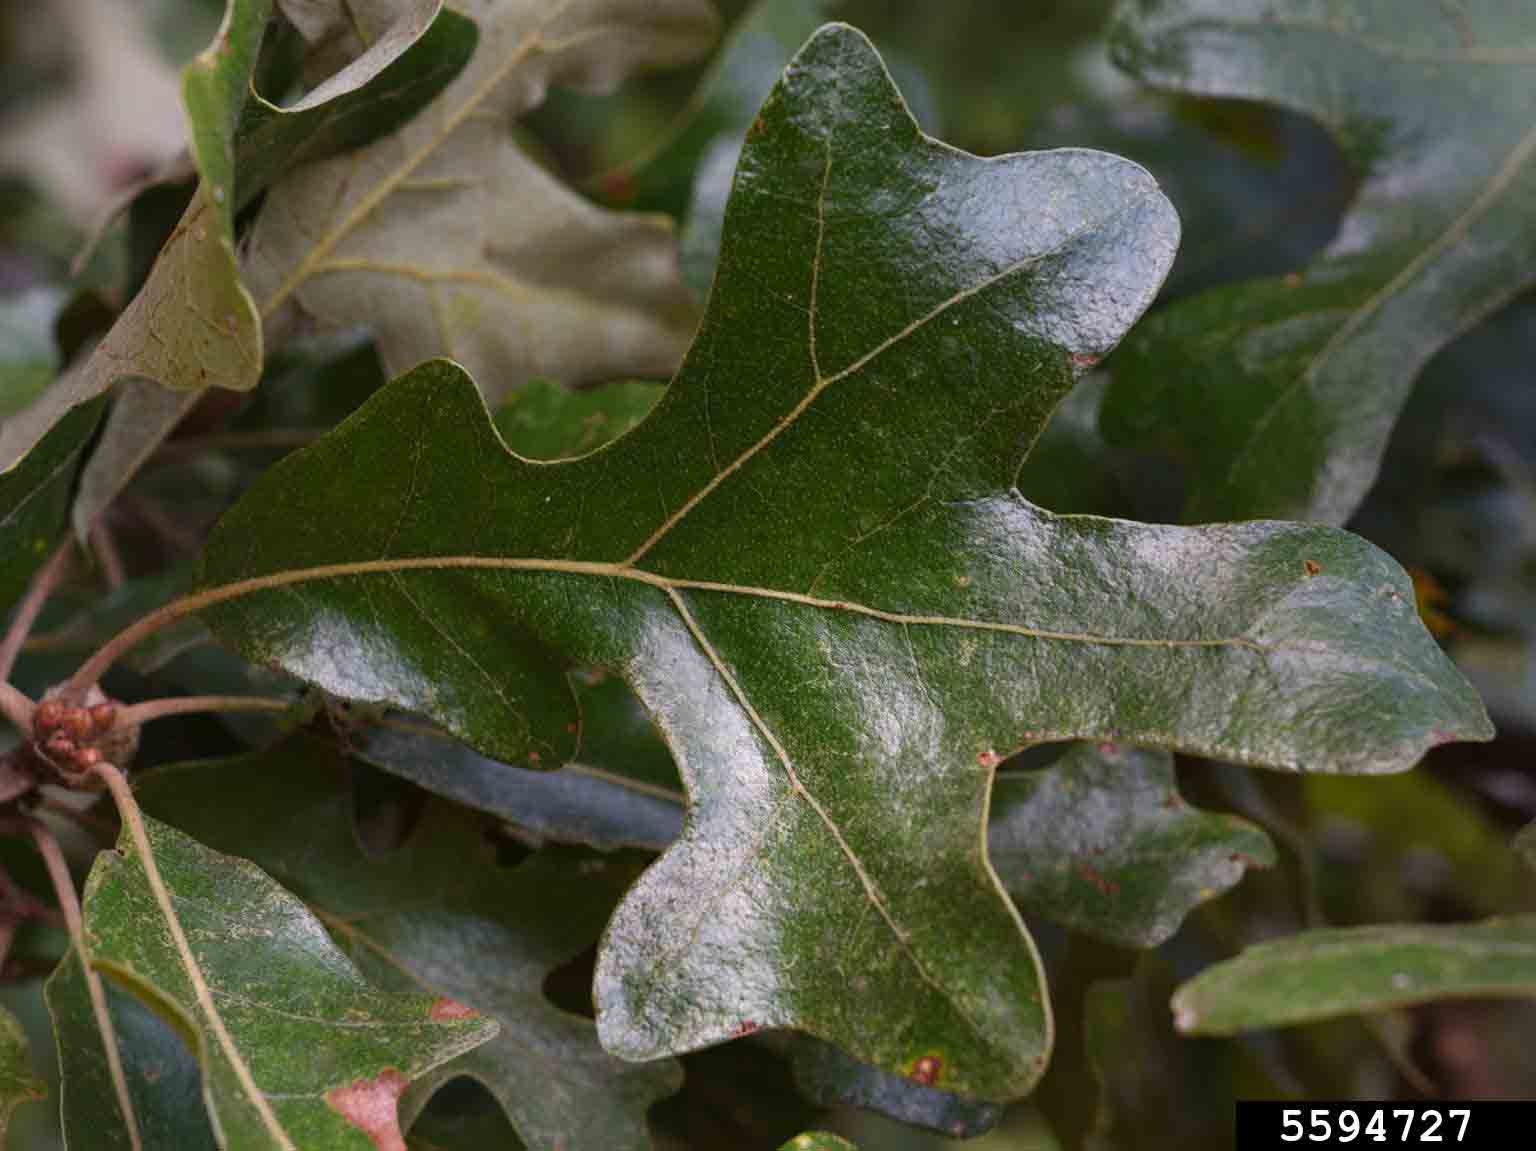 Post oak leaf, showing two central lobes at right angles, with no bristles on the tips